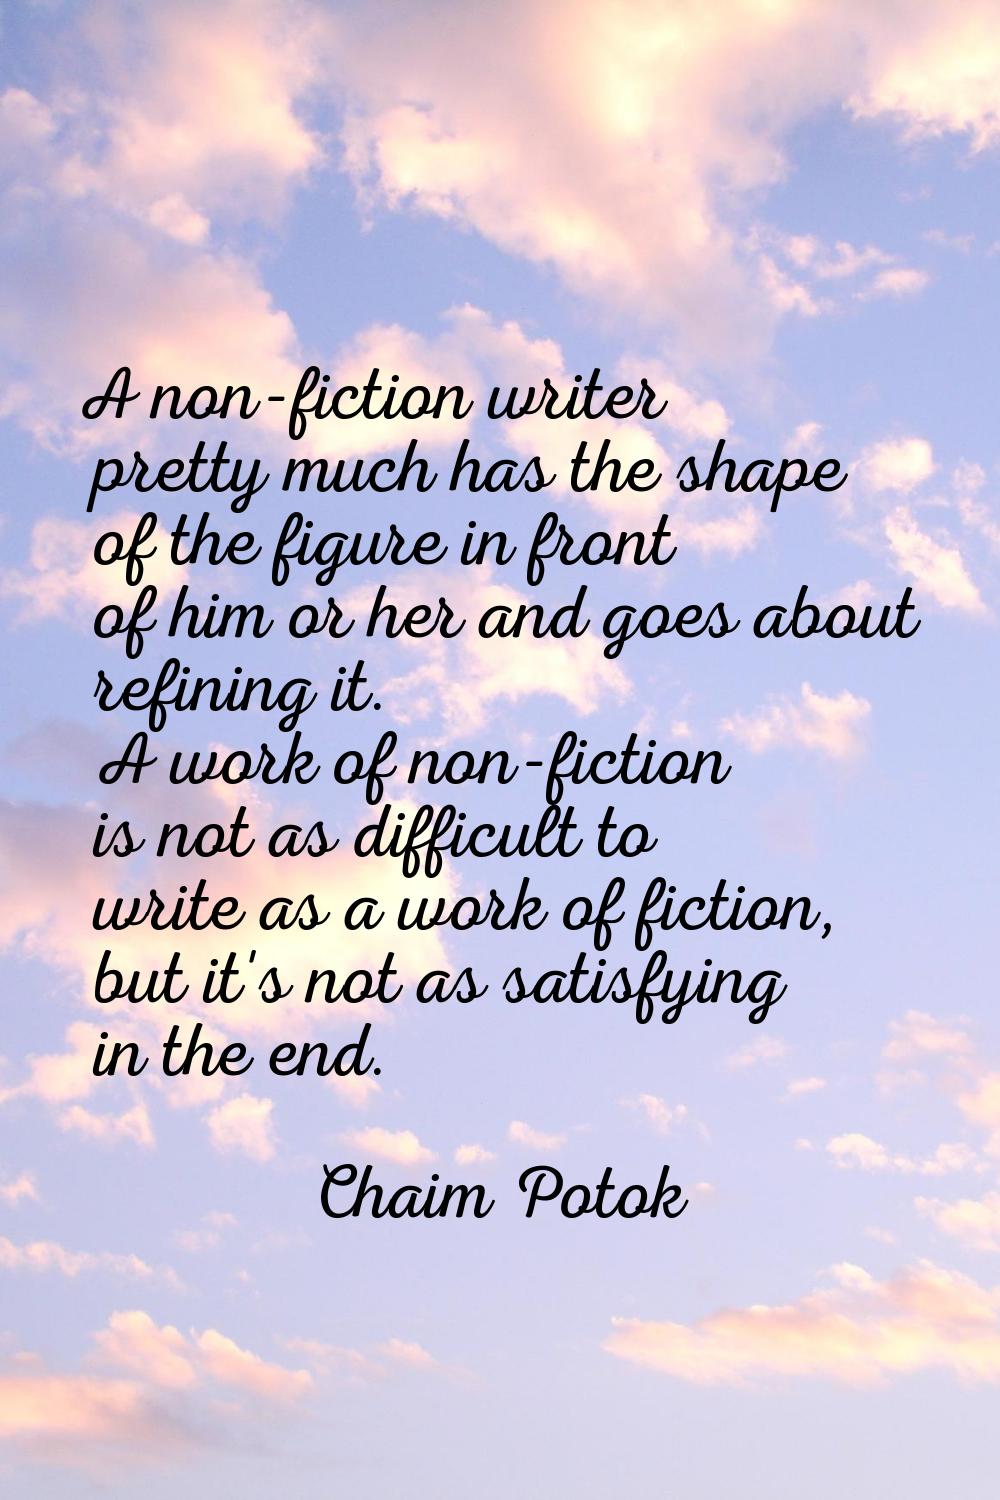 A non-fiction writer pretty much has the shape of the figure in front of him or her and goes about 